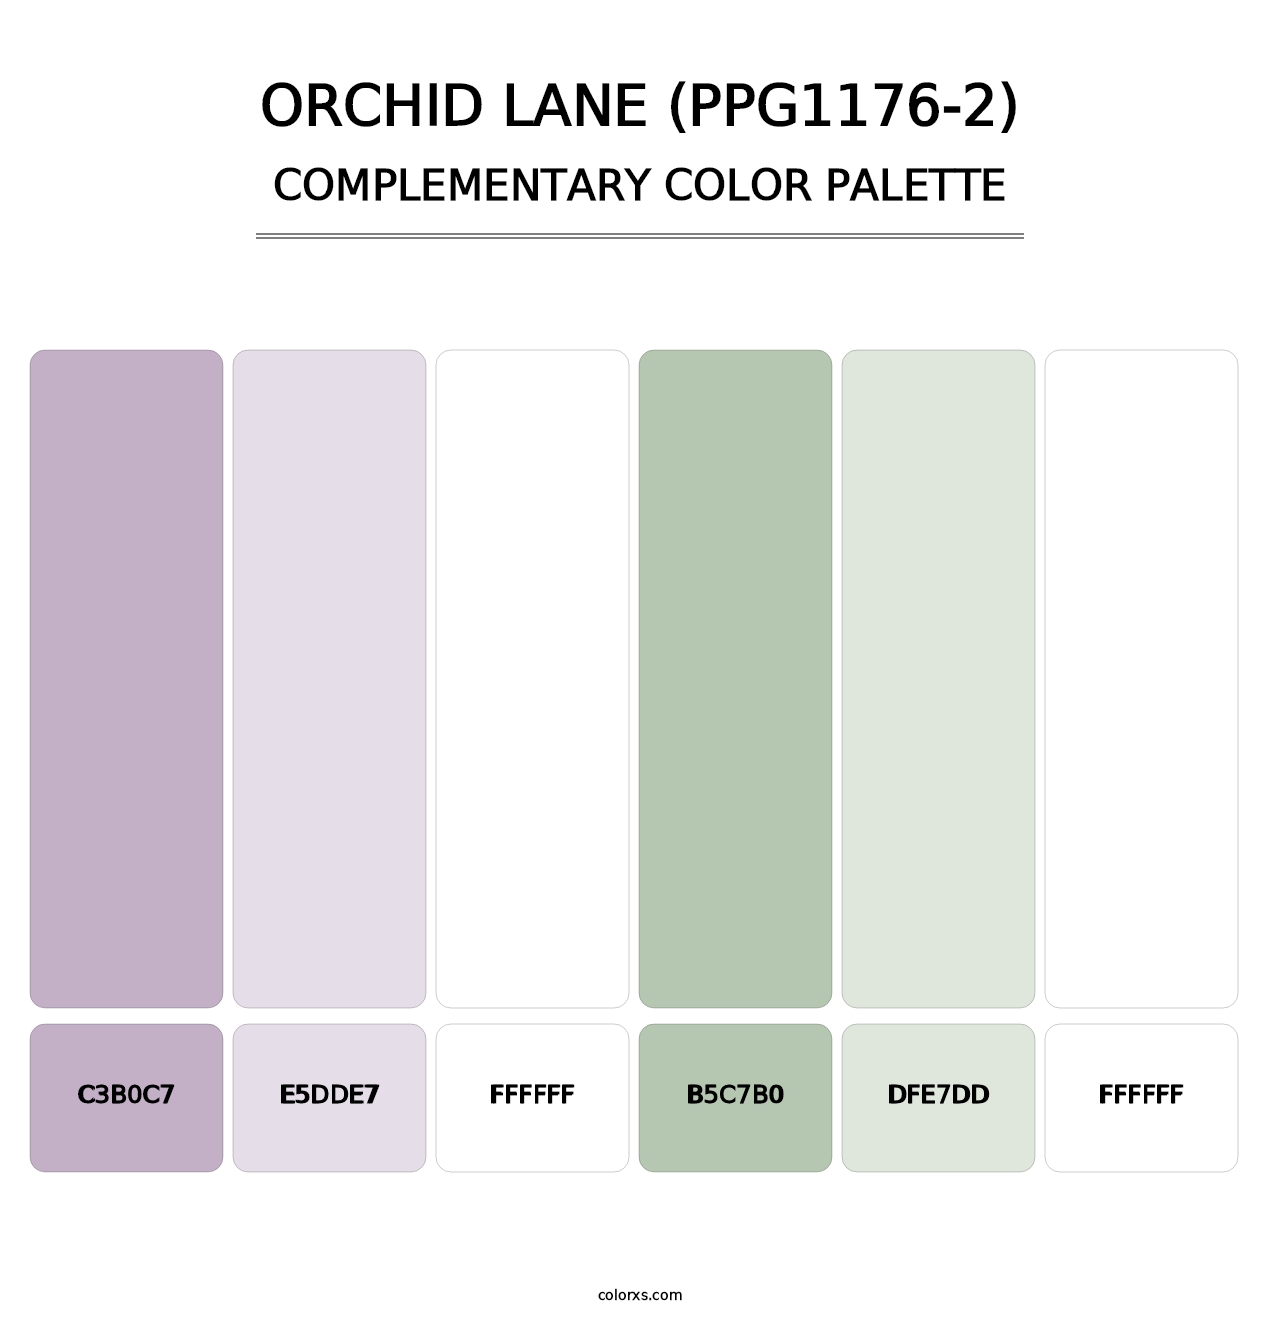 Orchid Lane (PPG1176-2) - Complementary Color Palette